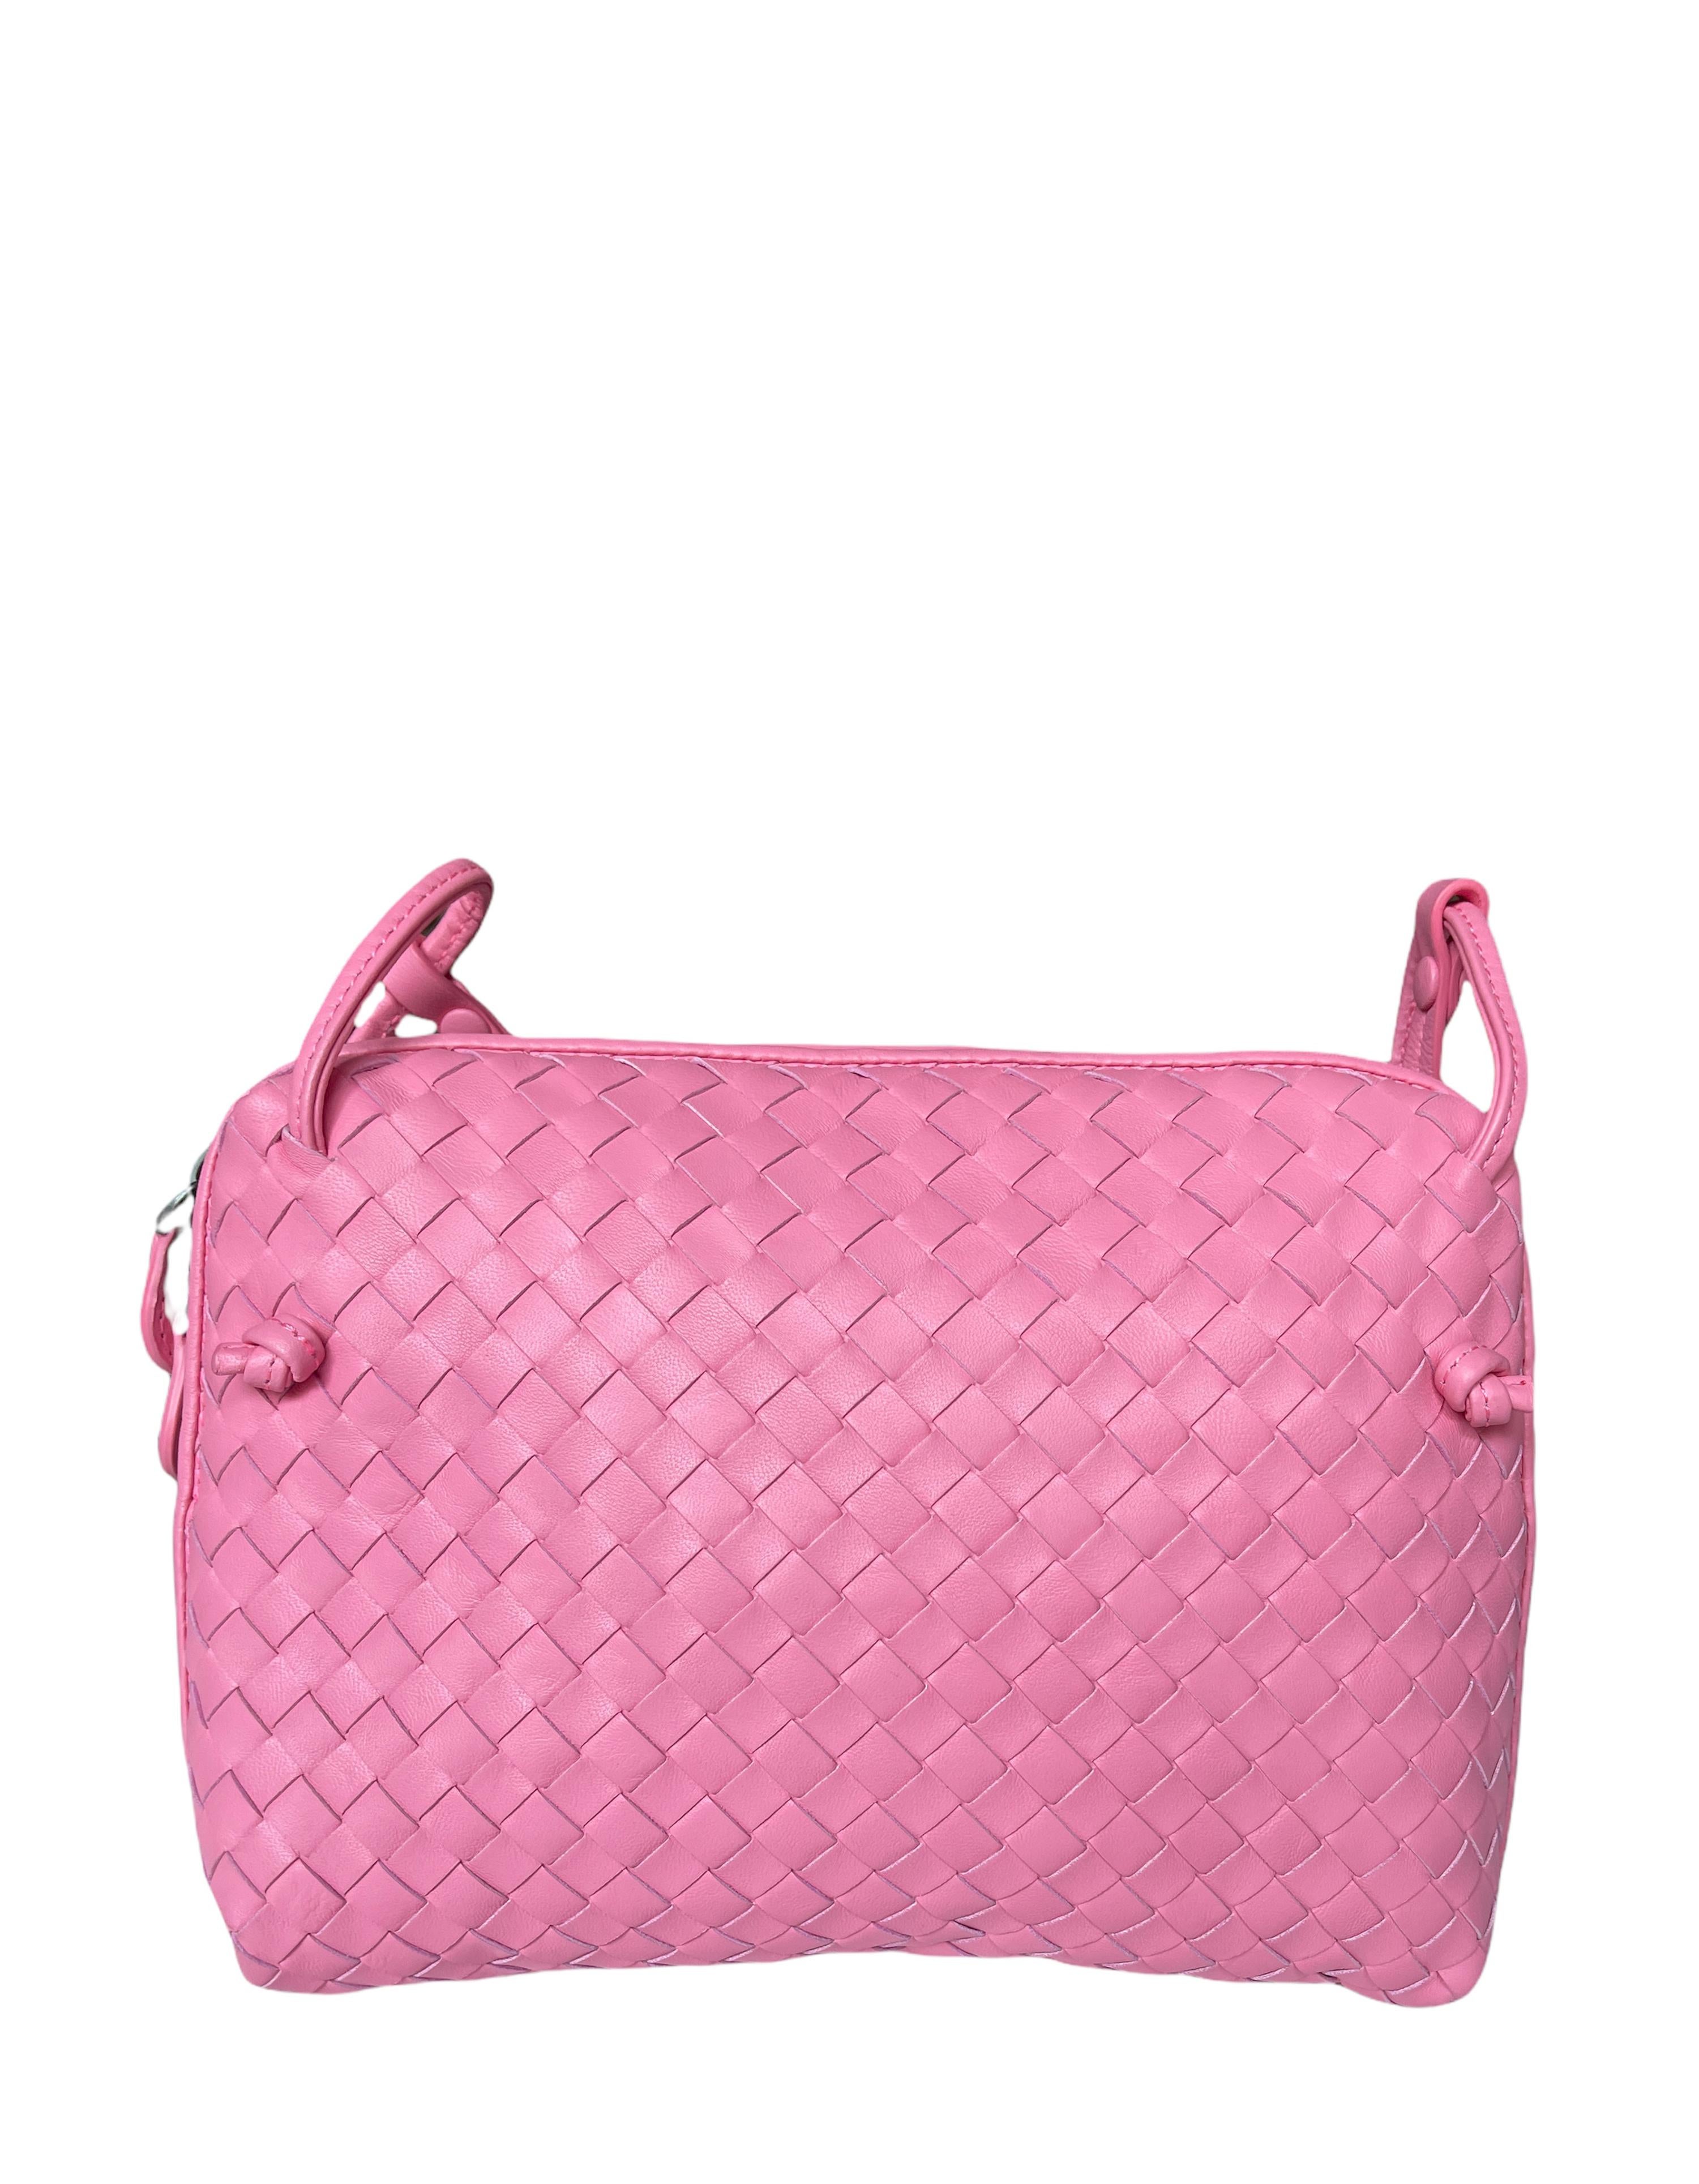 Bottega Veneta Pink Nappa Intrecciato Nodini Crossbody Bag
Made In: Italy
Year of Production: 2021
Color: Bubblegum pink
Hardware:
Materials: Nappa Leather
Lining: Suede
Closure/Opening: Zip top
Exterior Pockets: None
Interior Pockets: One zip and